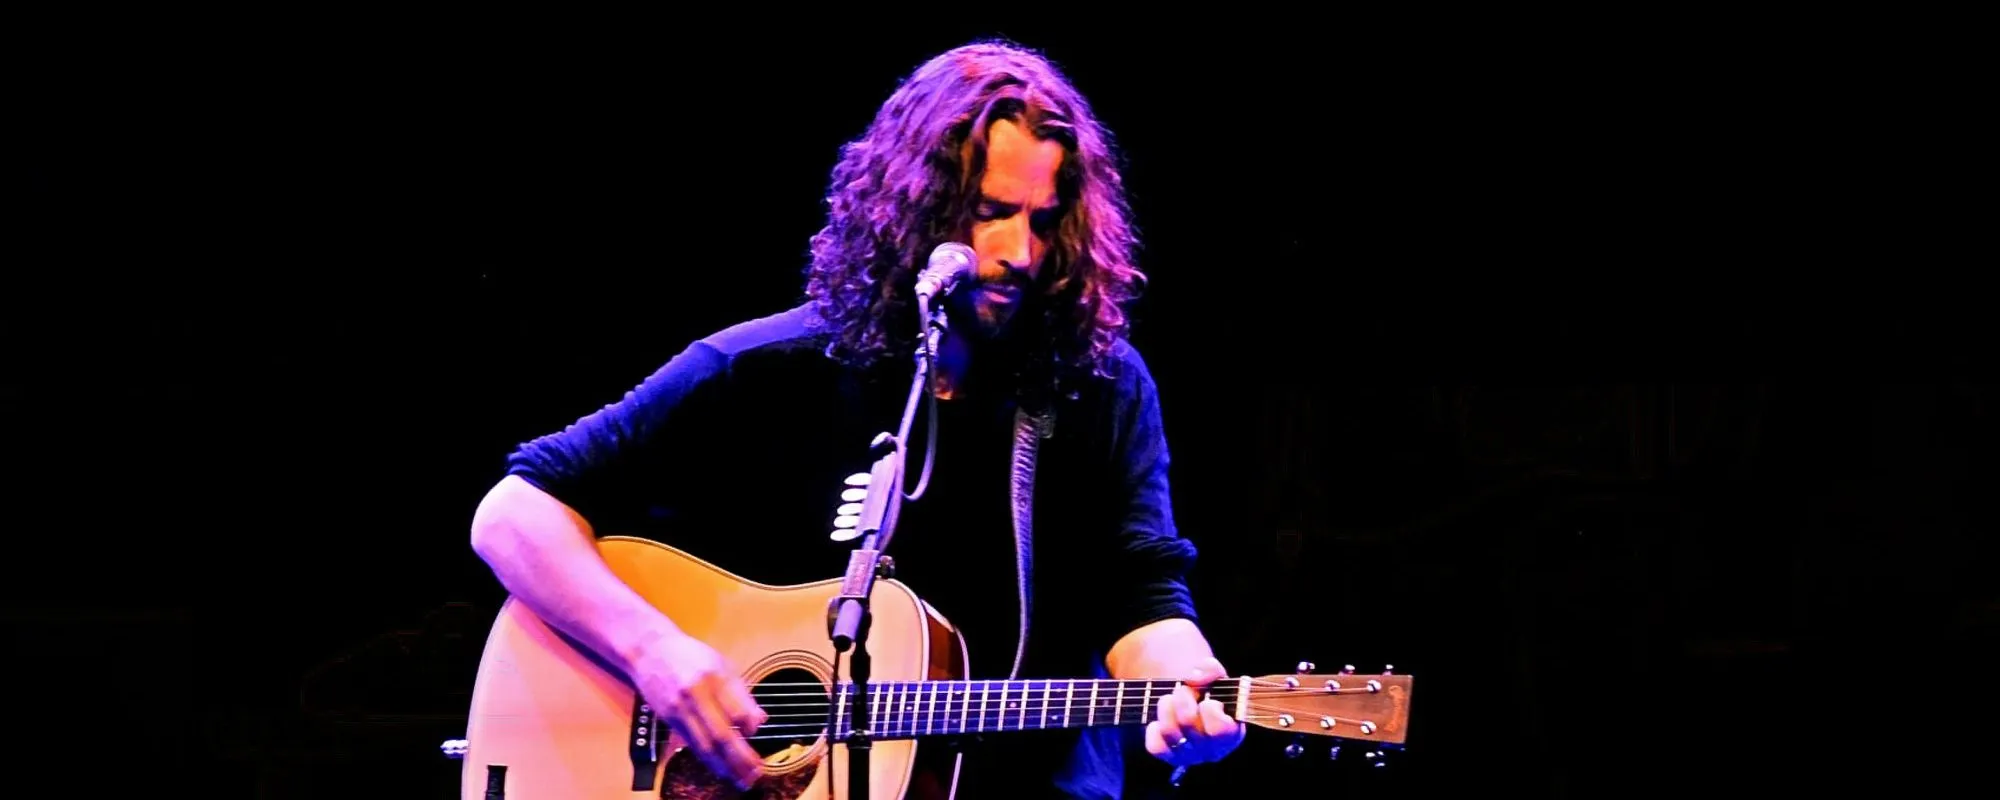 Chris Cornell Celebrated by Wife and Daughter on SiriusXM Special Show